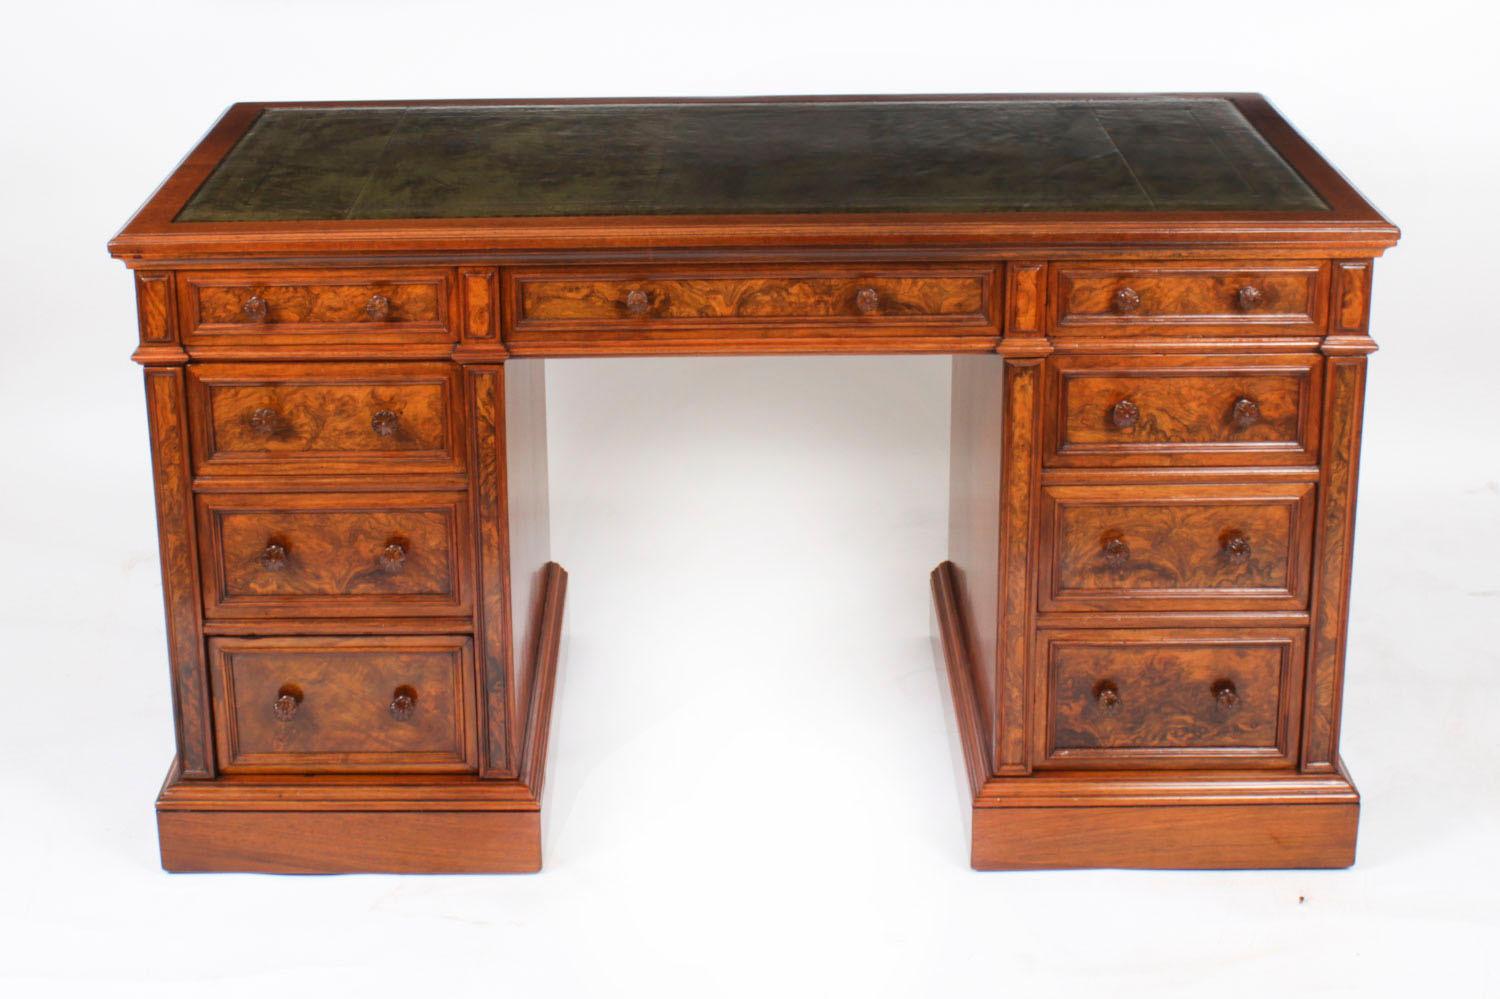 This is a superb antique Victorian burr walnut pedestal desk, by the world renowned cabinet maker, Gillow & Co, Circa 1880 in date.
 
It is made from fabulous burr walnut, which has a the rectangular top inset with a fabulous green and gold tooled